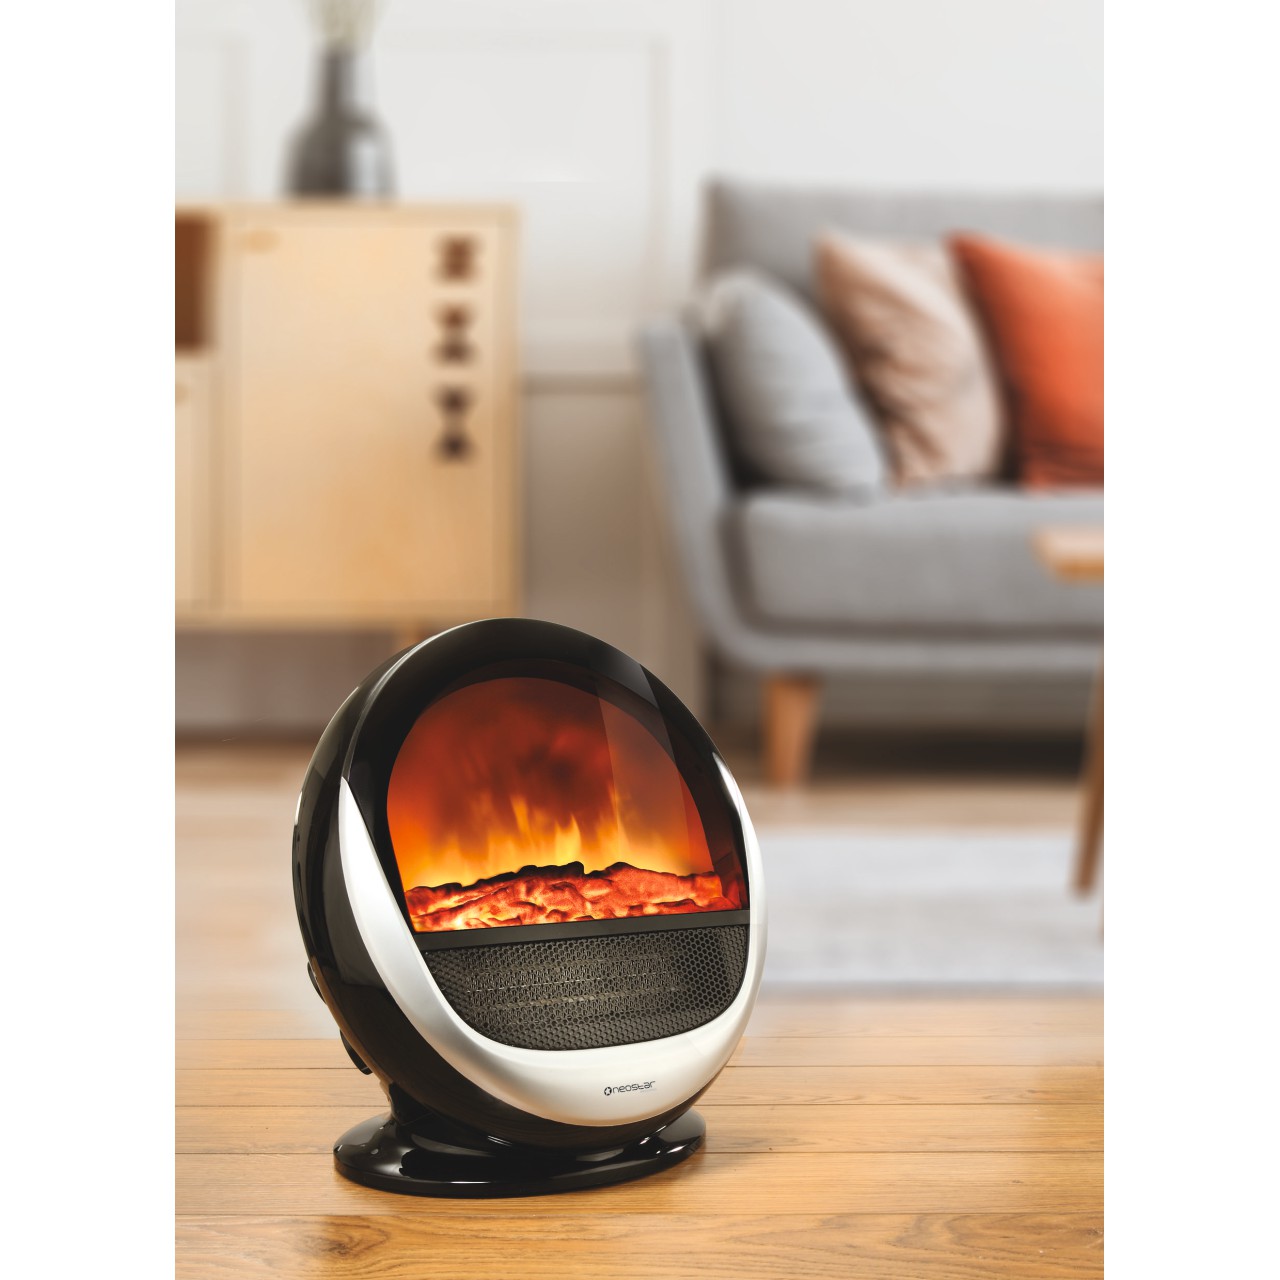 Neostar® Portable Ceramic Flame-effect Heater